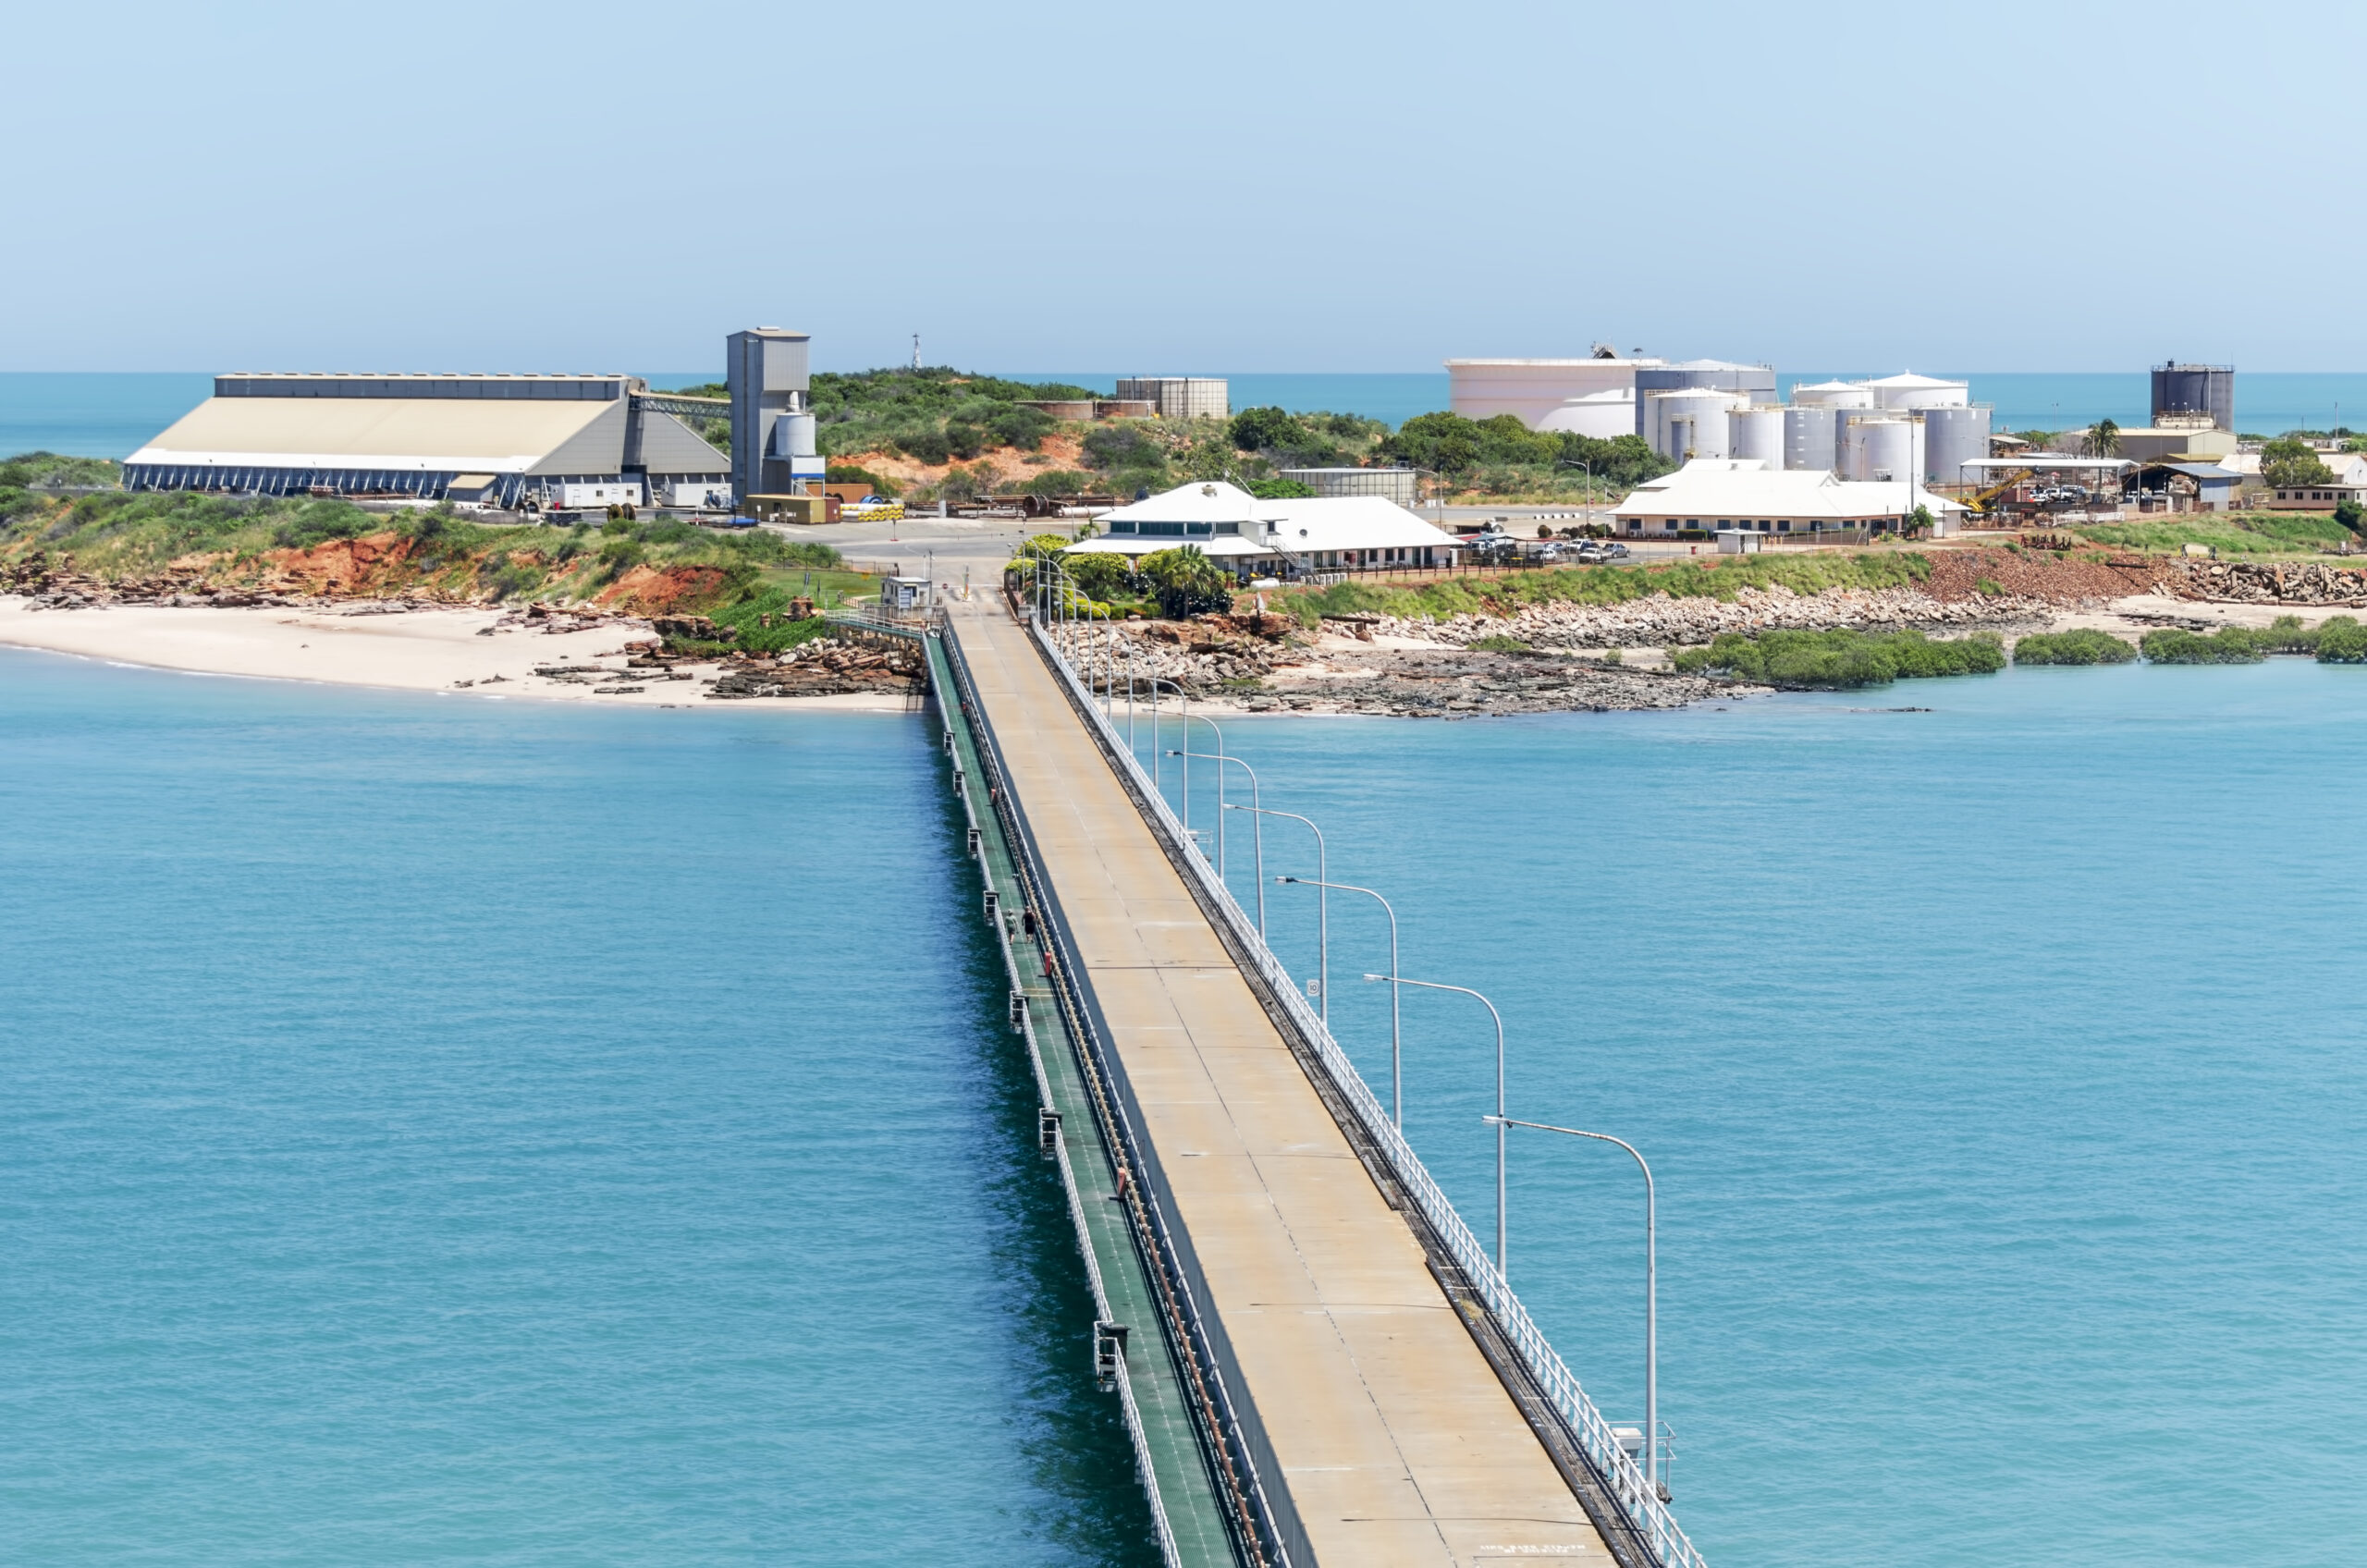 Port Pier at Broome home of the pearling industry in Western Australia,